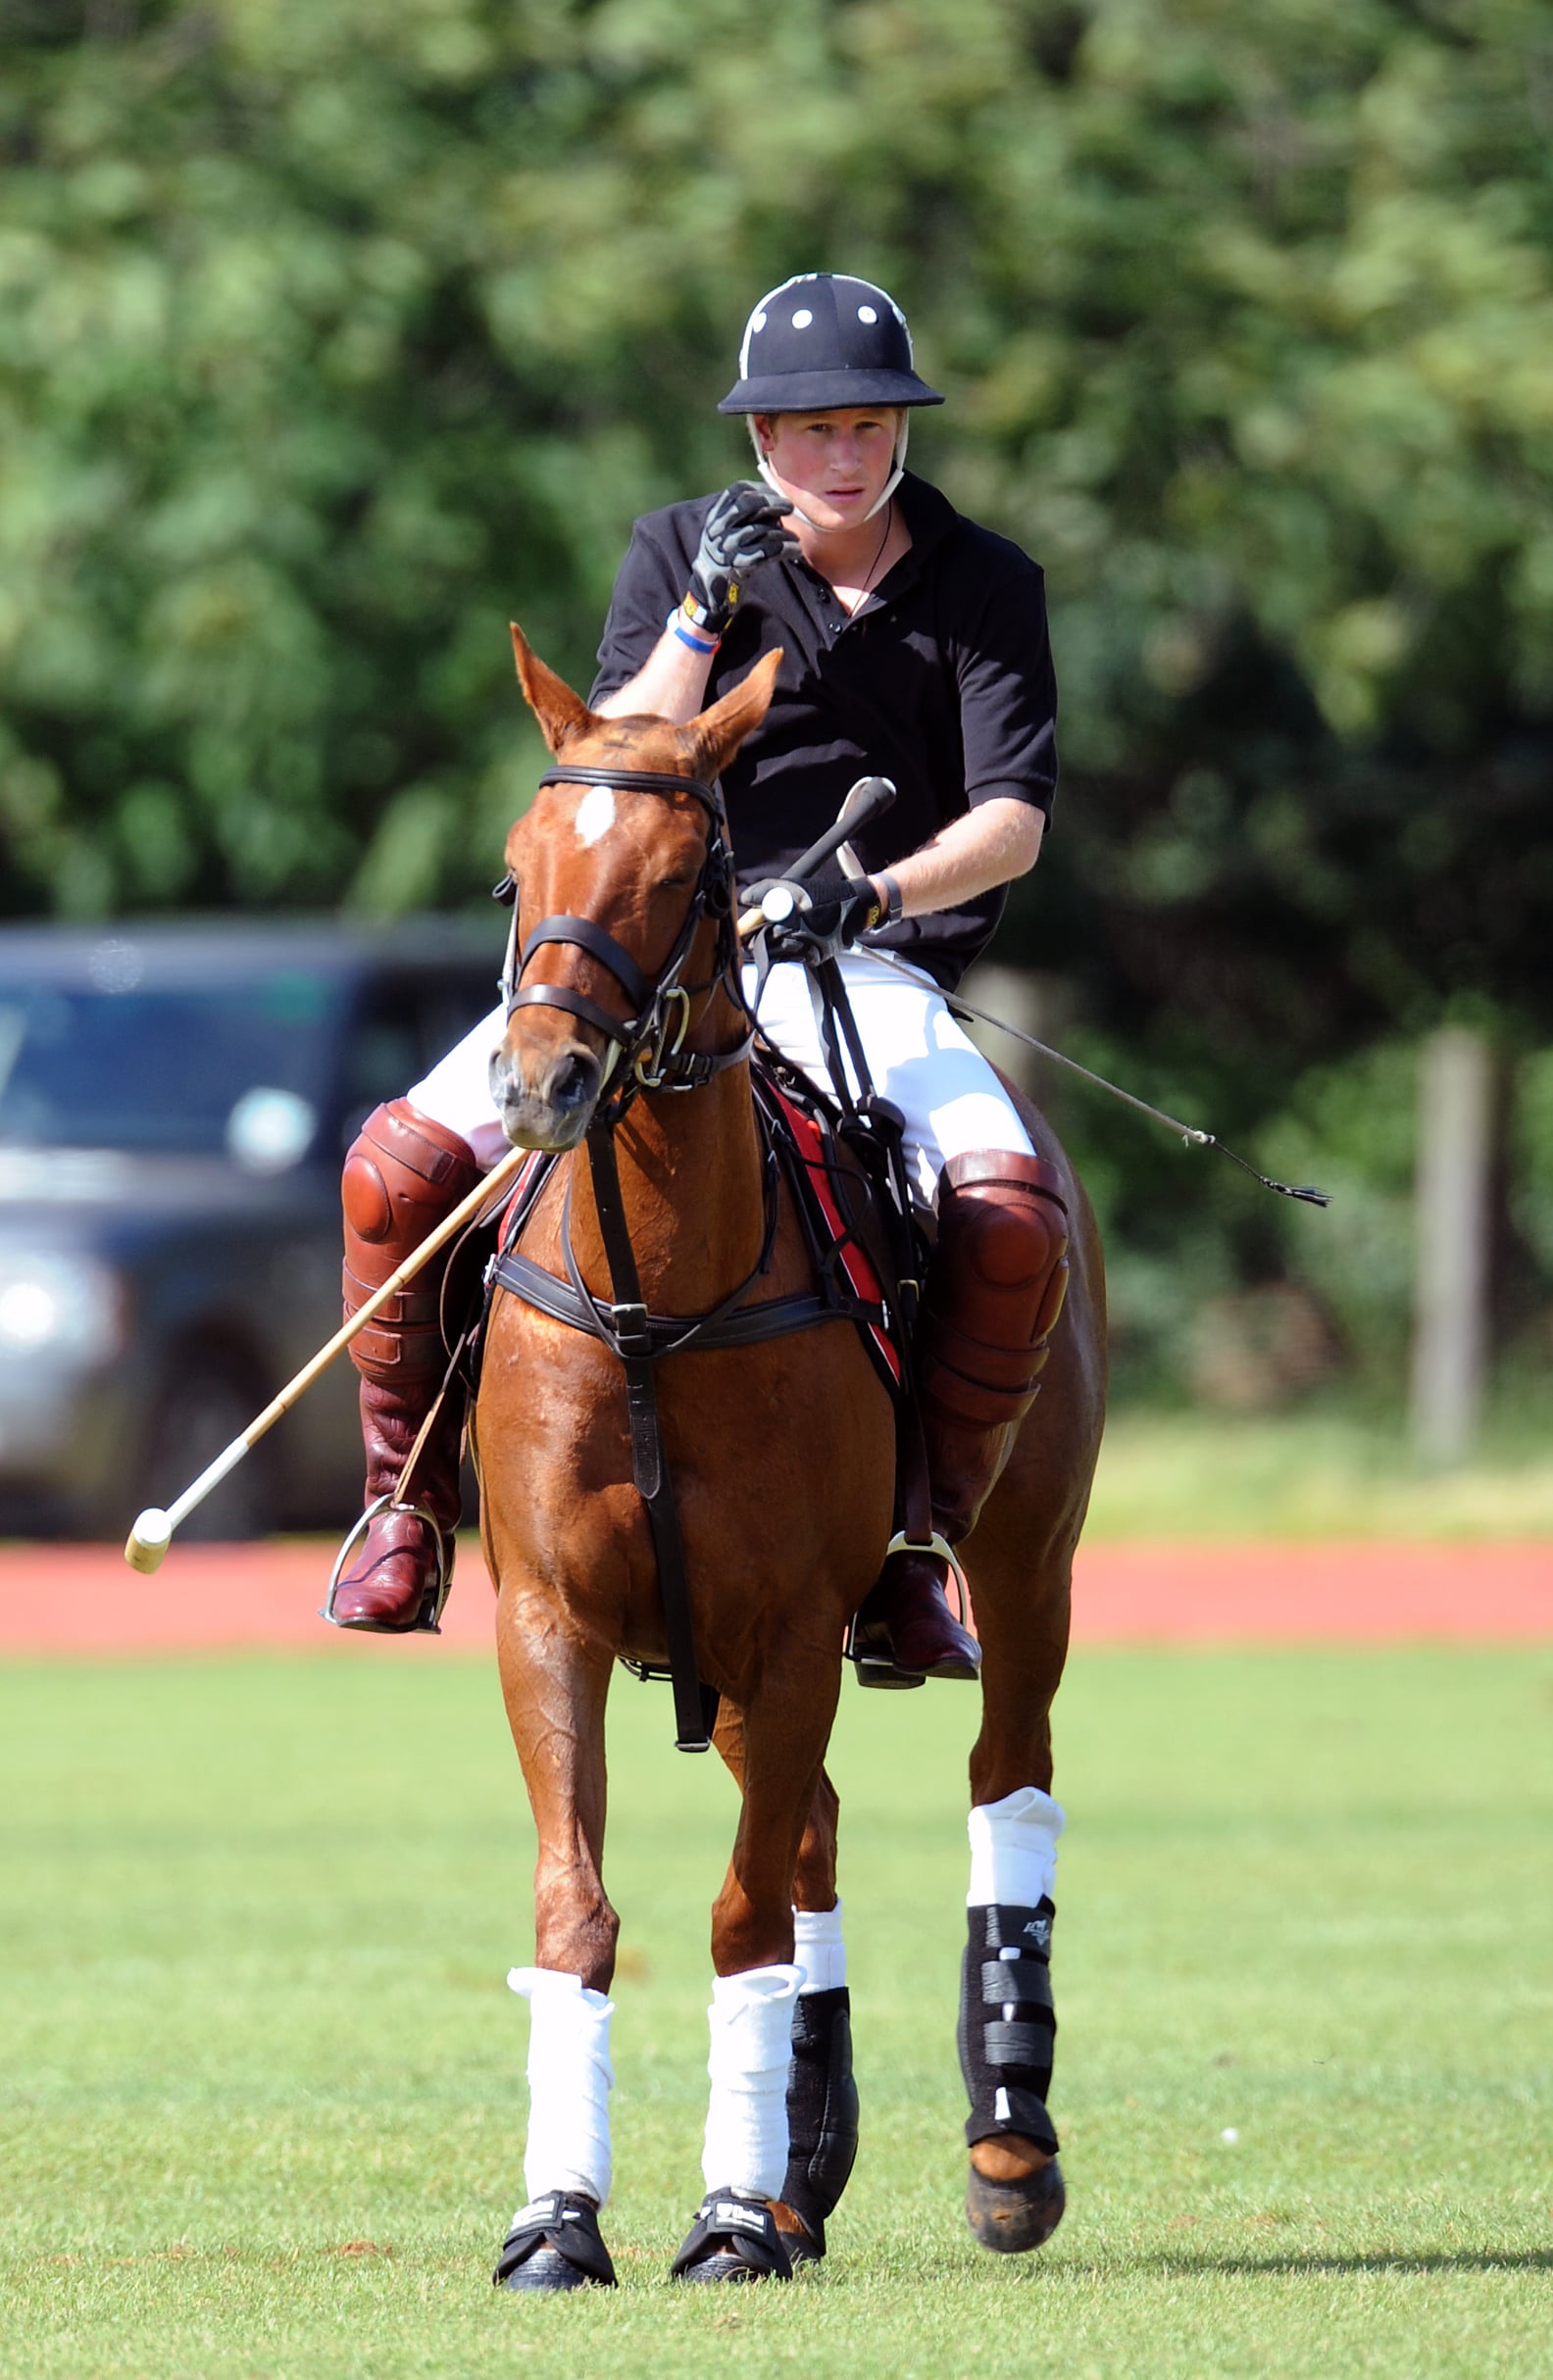 Sexy Prince Harry Playing Polo Pictures | POPSUGAR Celebrity